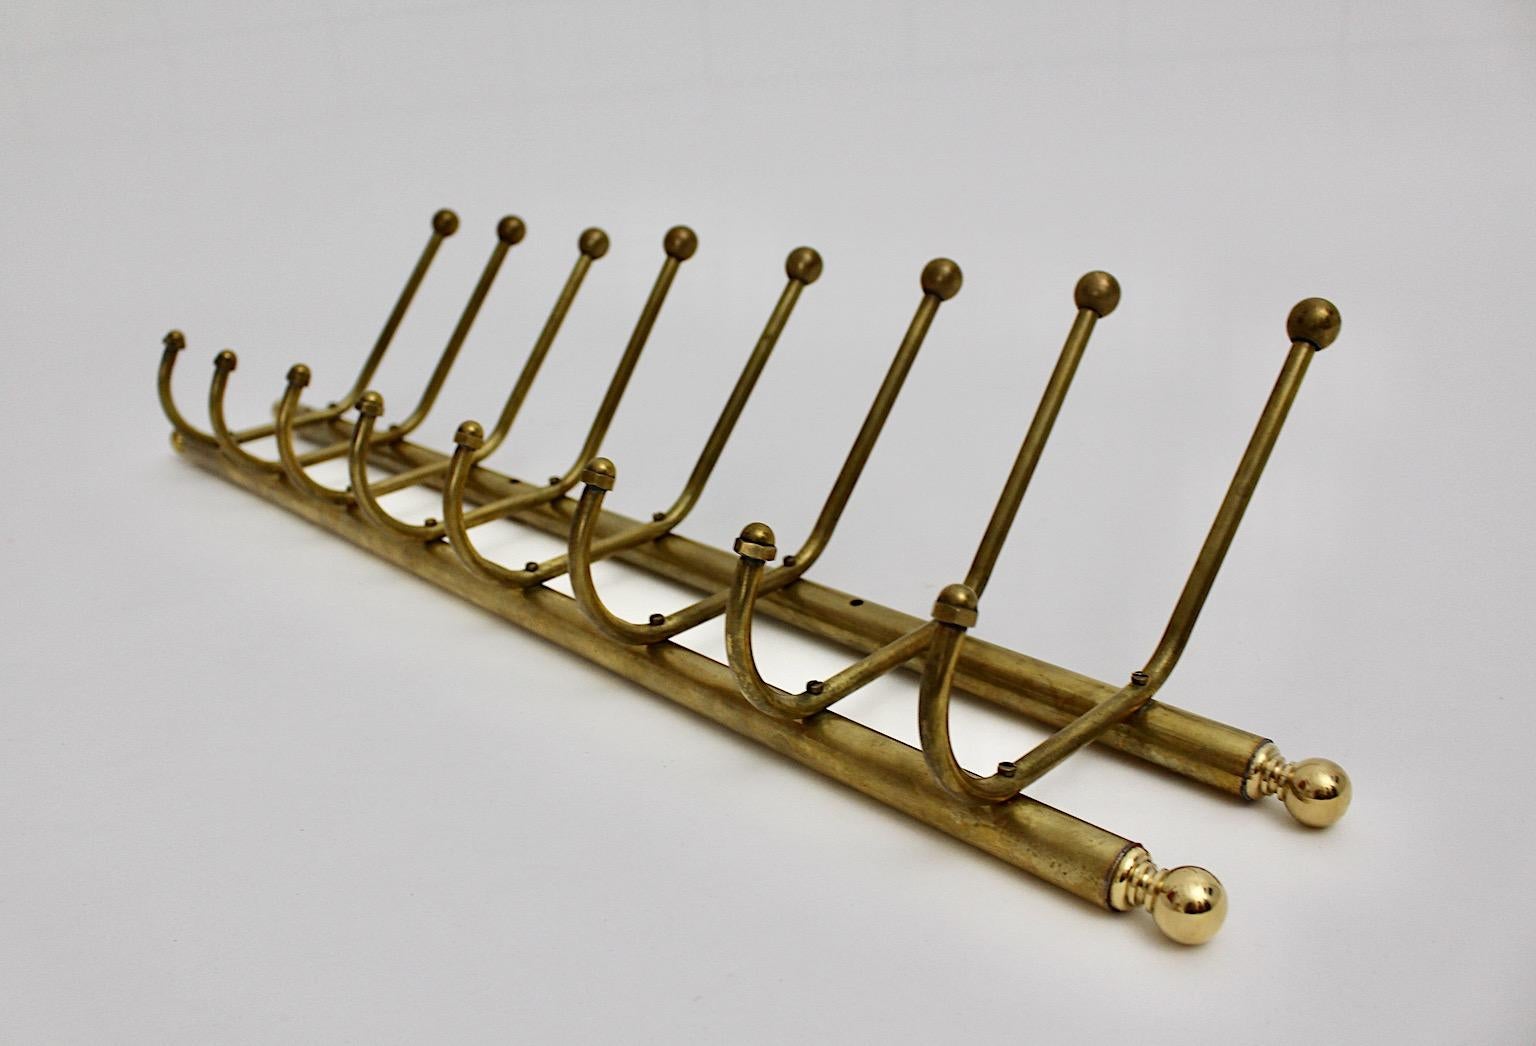 Art Deco vintage coat rack or rack with coat hooks from solid brass 1930s Austria.
A wonderful coat rack or coat hooks from solid brass with eight hooks for your coats and hats.
The rack is easy to mount with five screws at the wall.
The